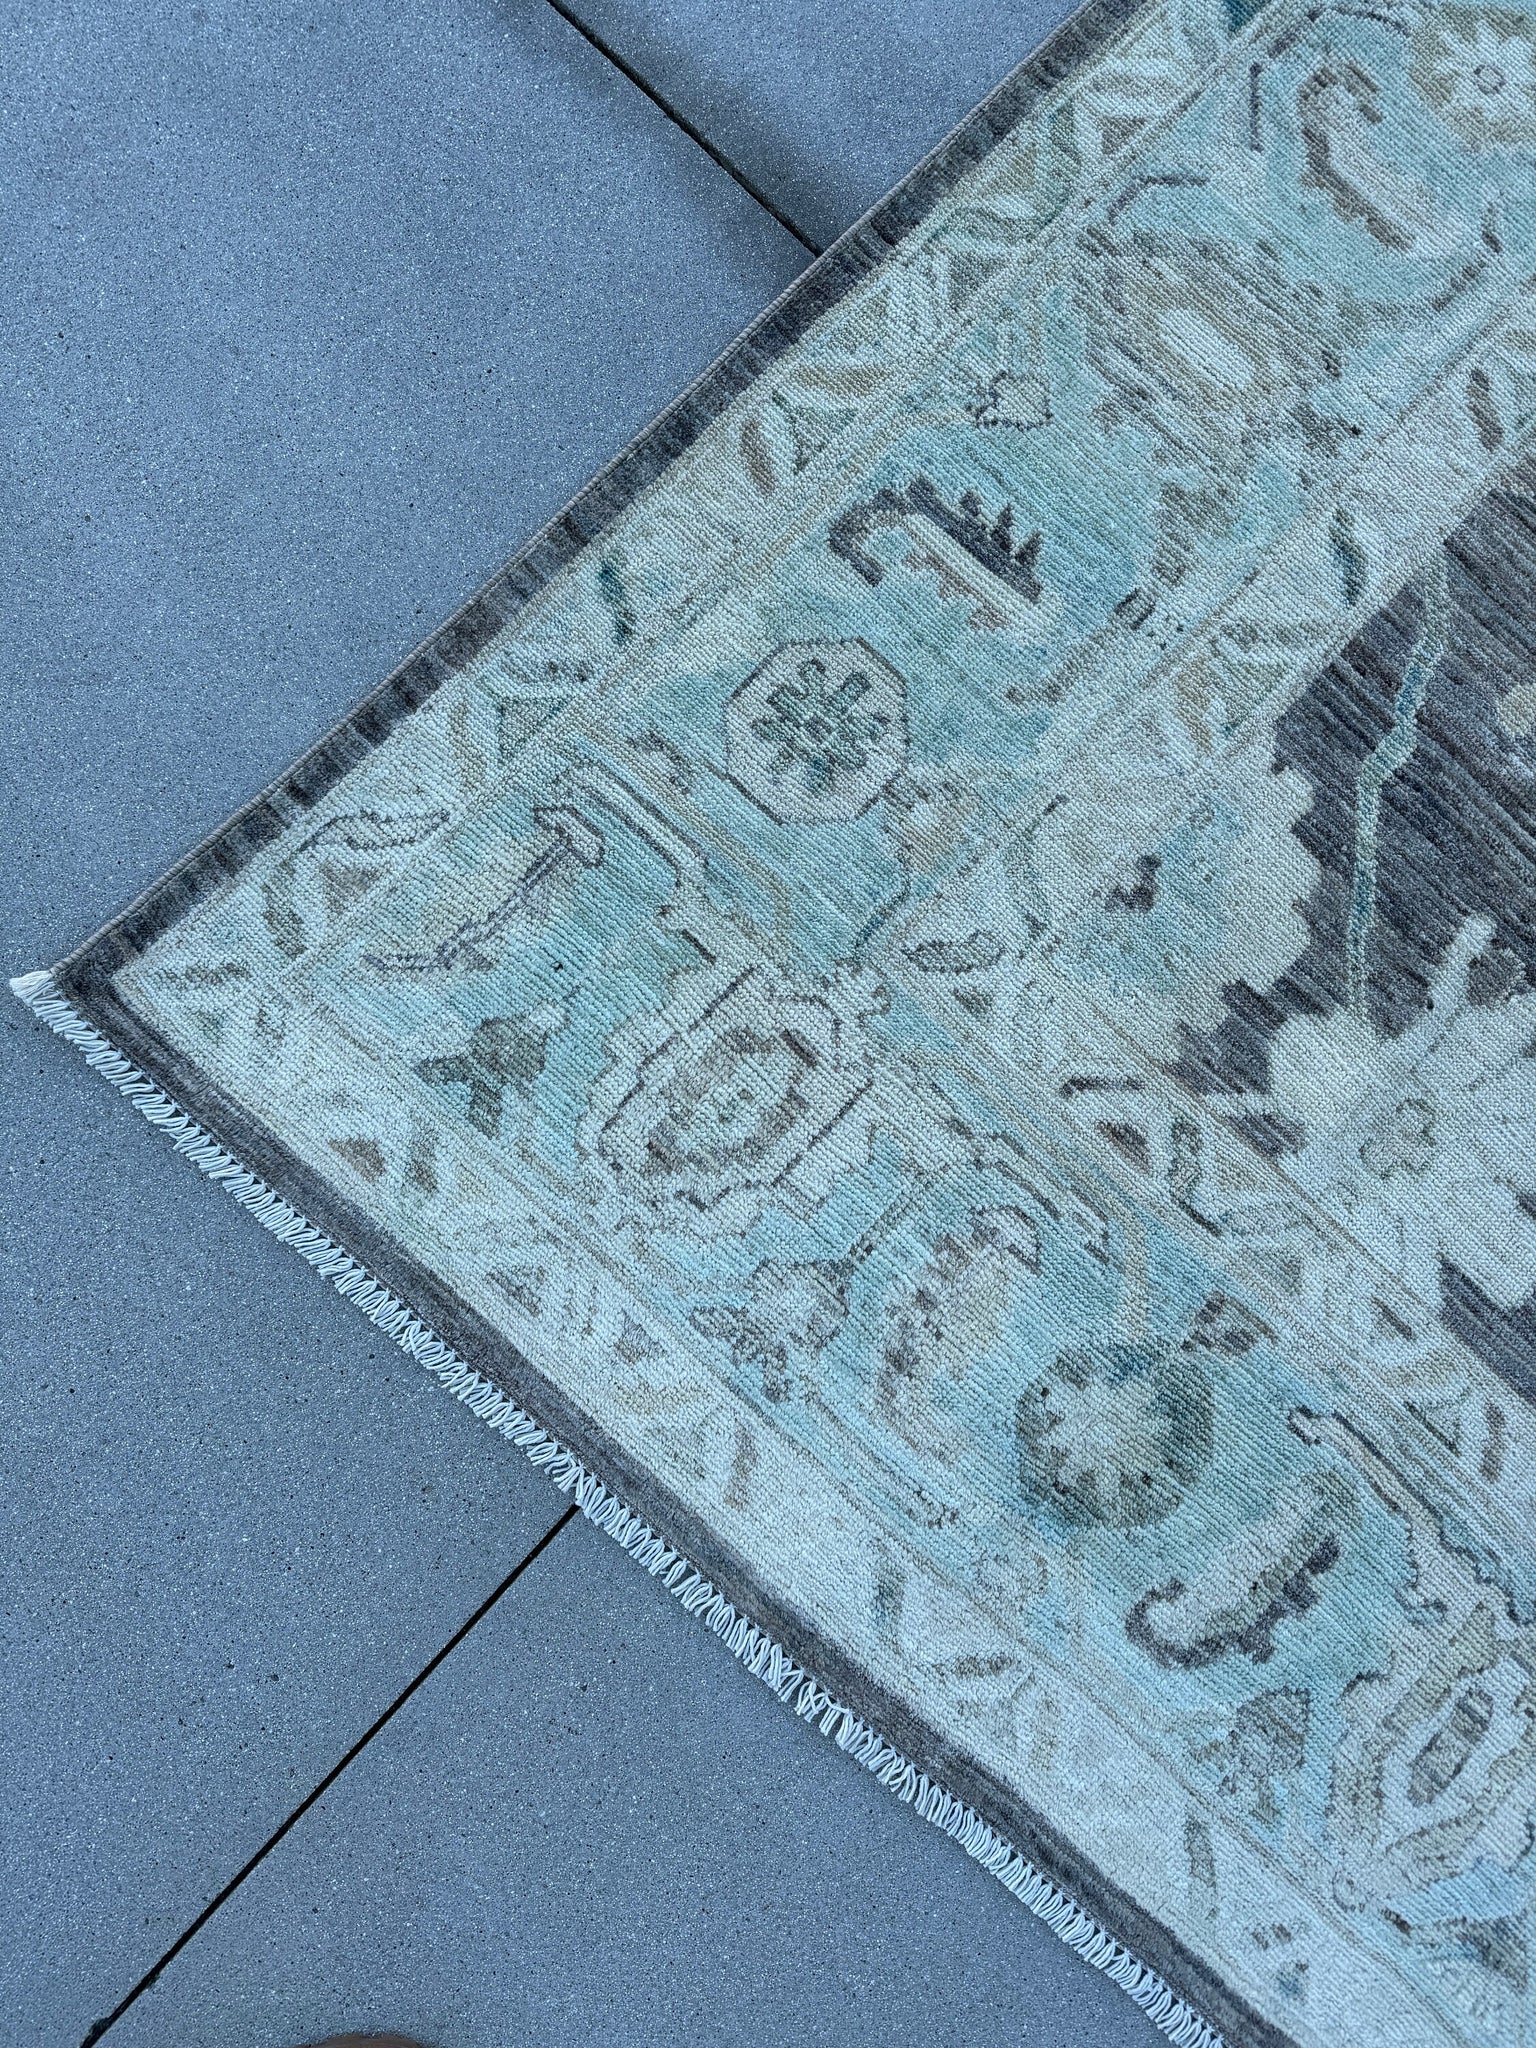 9x12 (270x365) Handmade Afghan Rug | Charcoal Grey Gray Baby Aqua Blue Cream Teal Taupe | Wool Oushak Hand Knotted Persian Floral